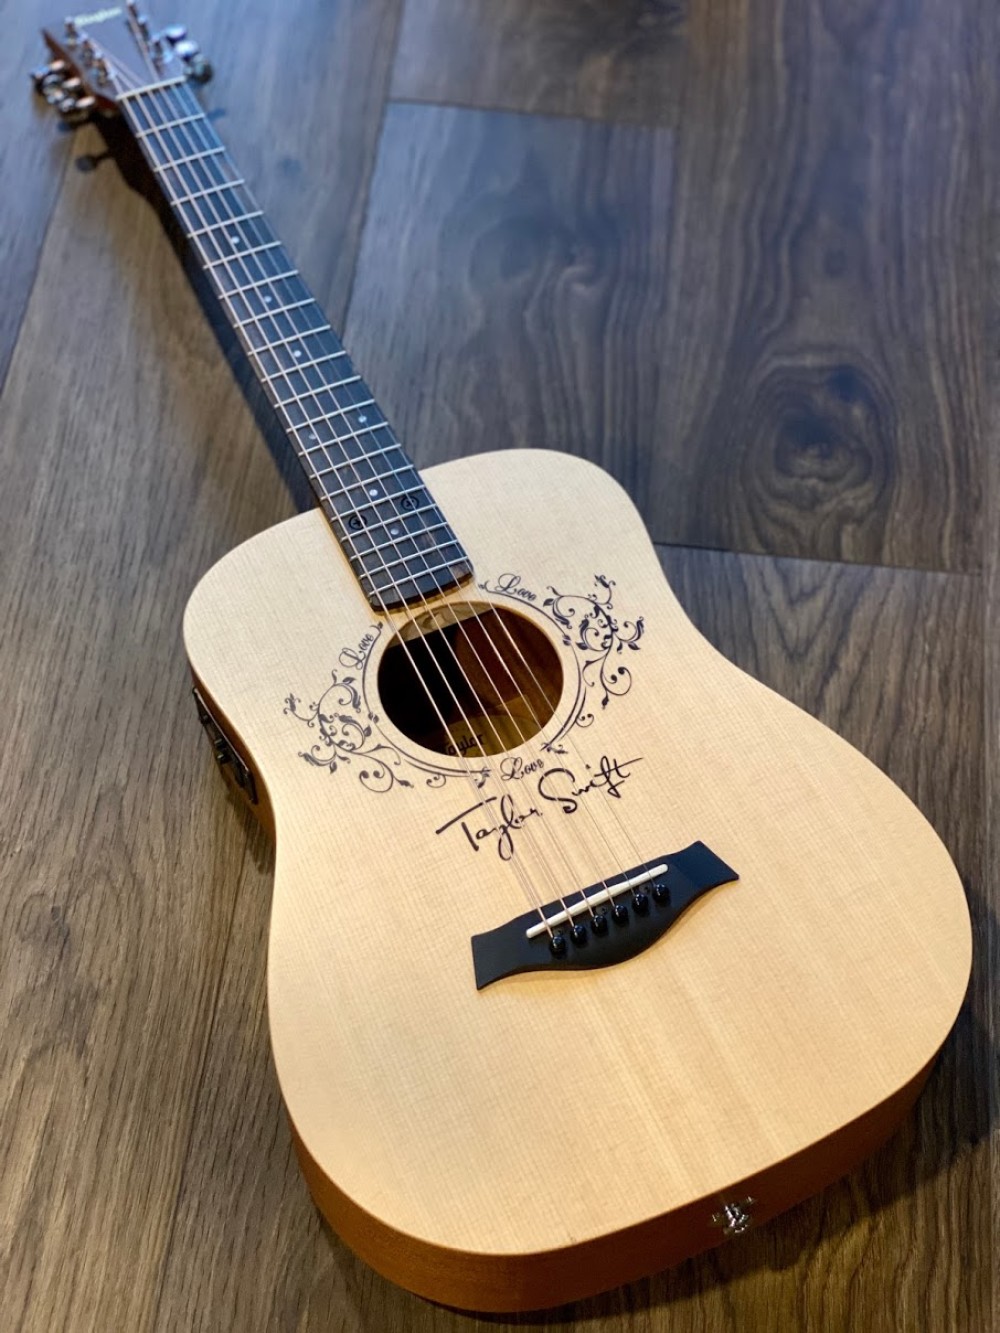 Taylor Baby Taylor-e Acoustic Guitar with Bag Taylor Swift Signature